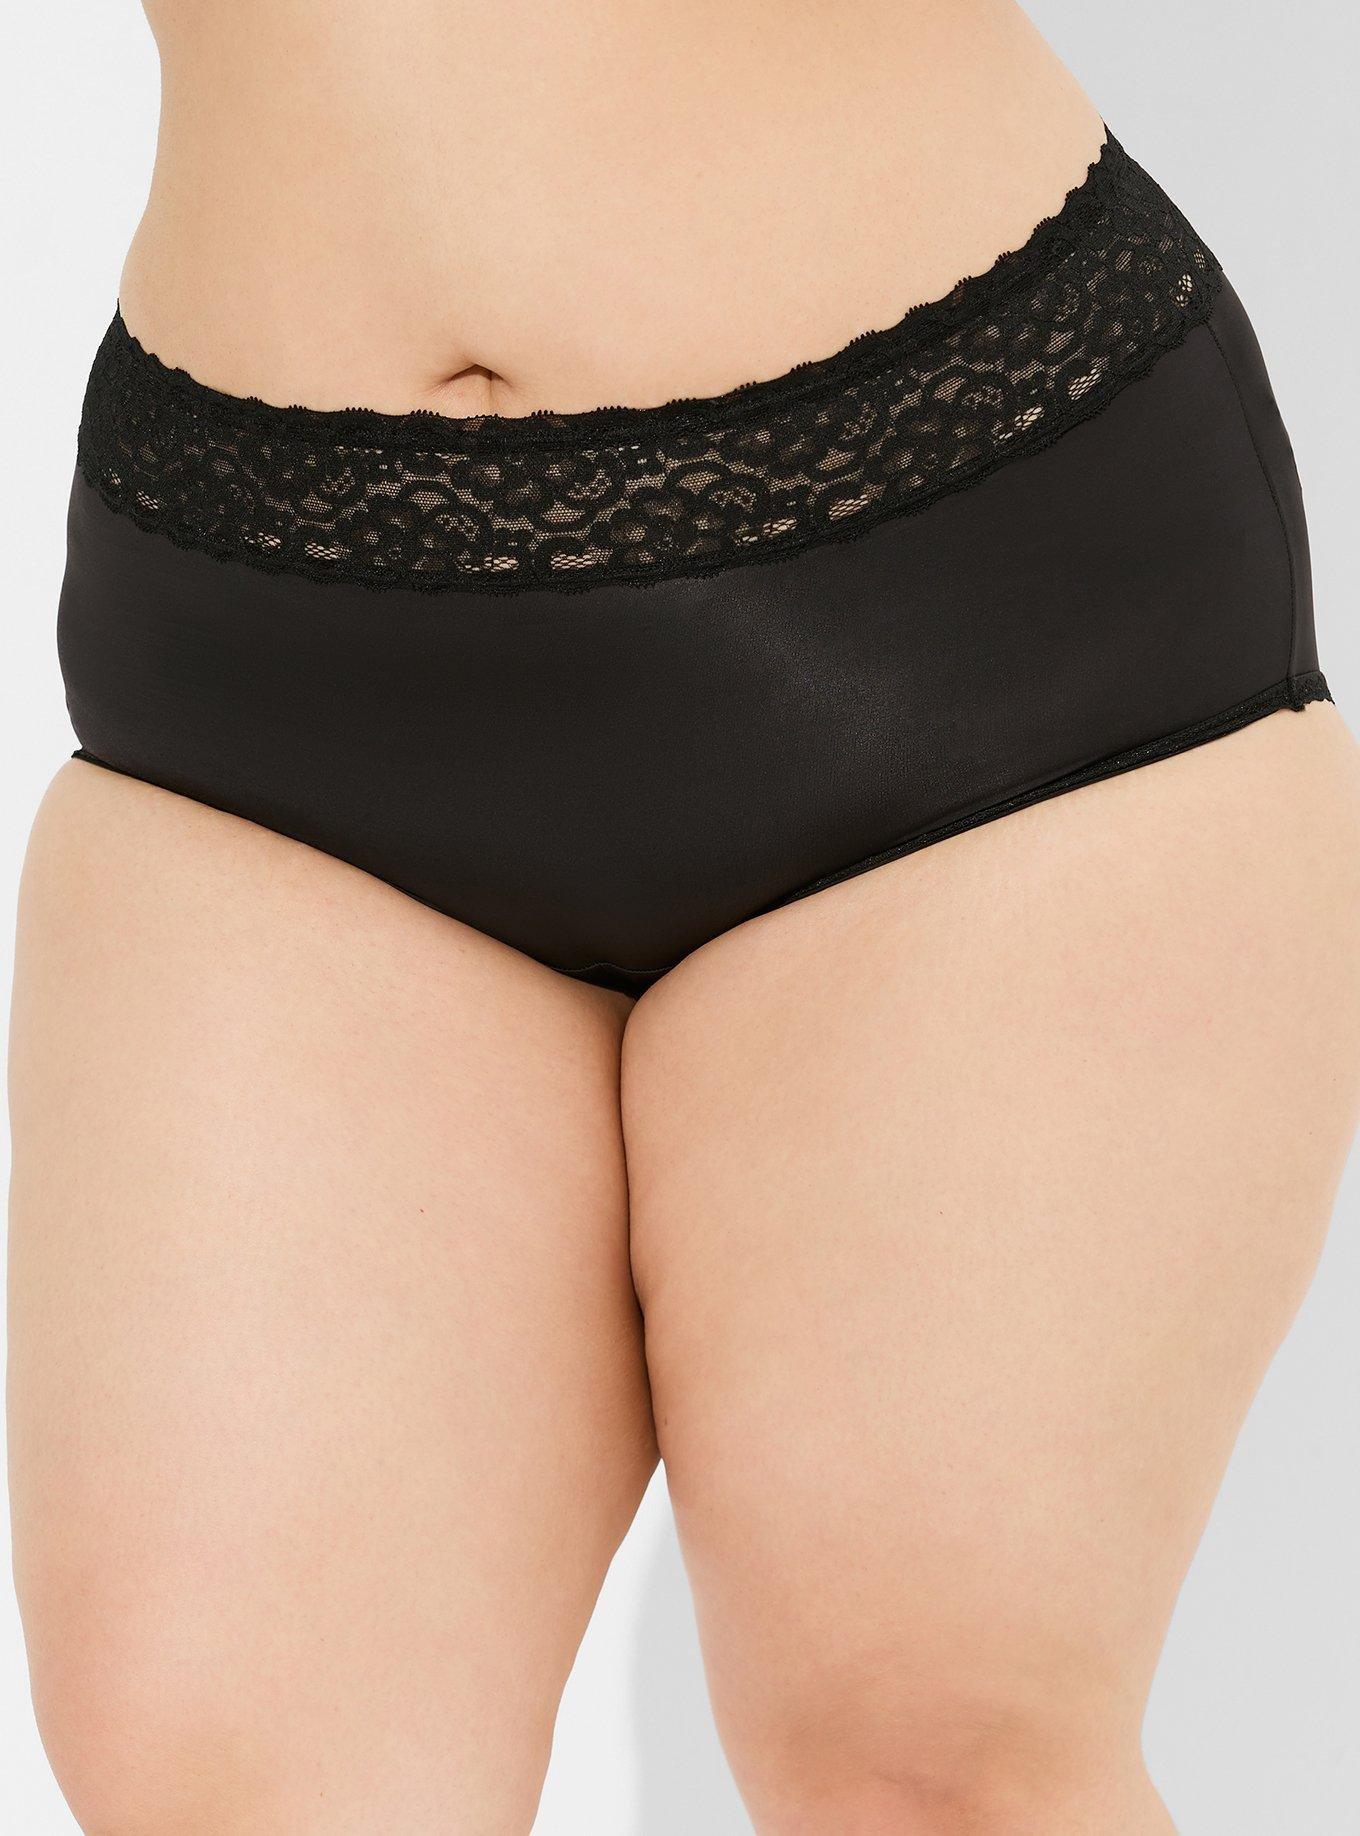  Knowyou High Waisted Underwear for Women Breathable Cute High  Cut Panties for Ladies Women's Comfortable Full Coverage Brief : Clothing,  Shoes & Jewelry